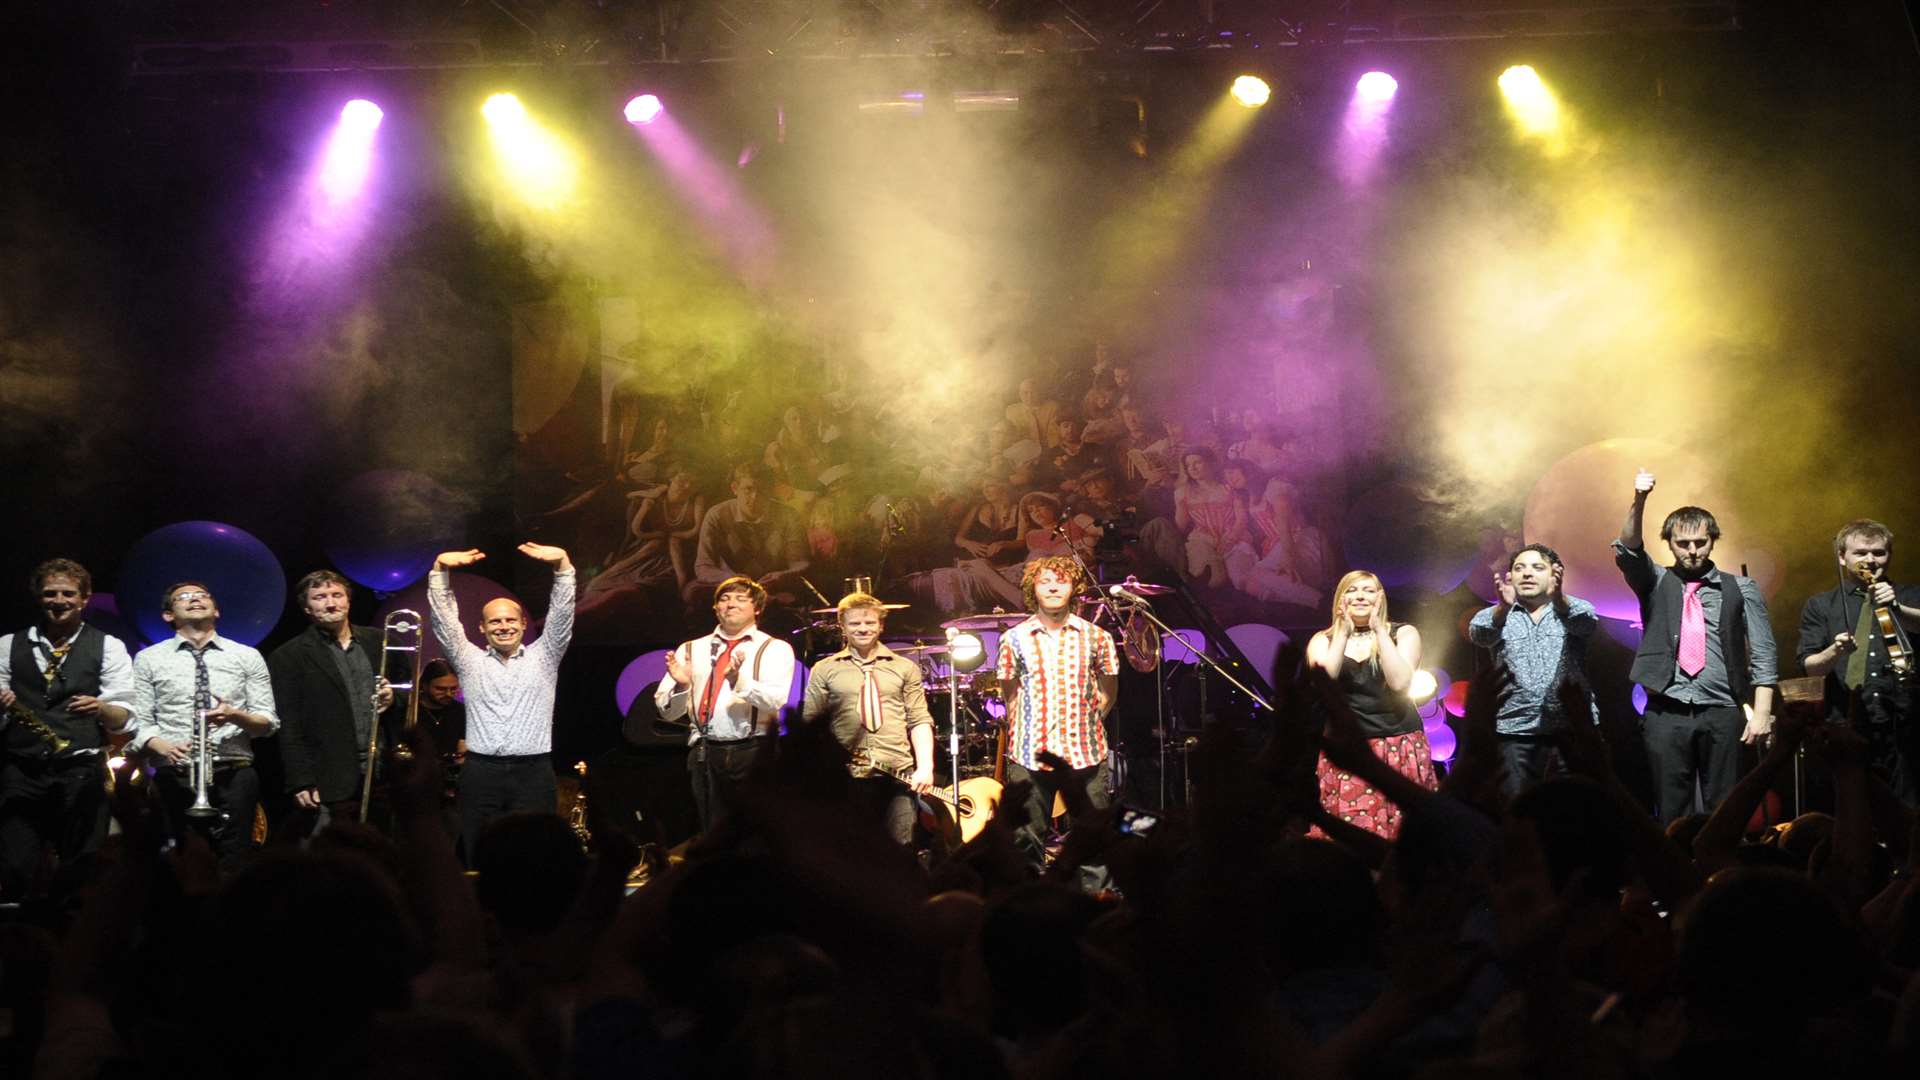 Bellowhead are performing at the Leas Cliff Hall as part of their final tour. Picture: Leas Cliff Hall/Mark Holloway